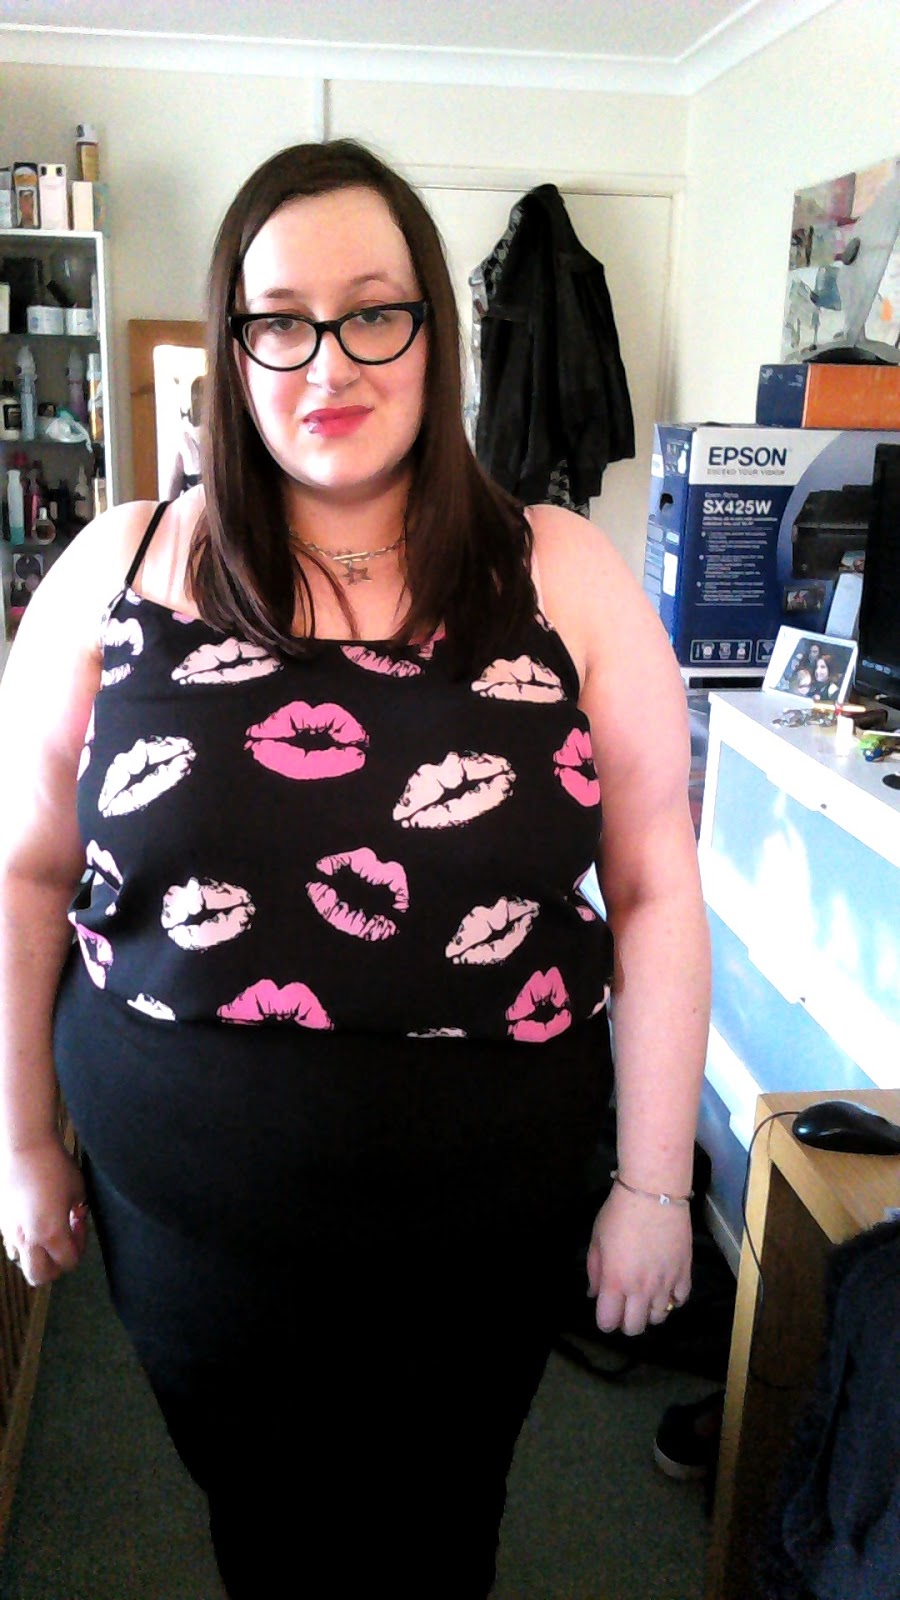 Lip service - Does My Blog Make Me Look Fat?